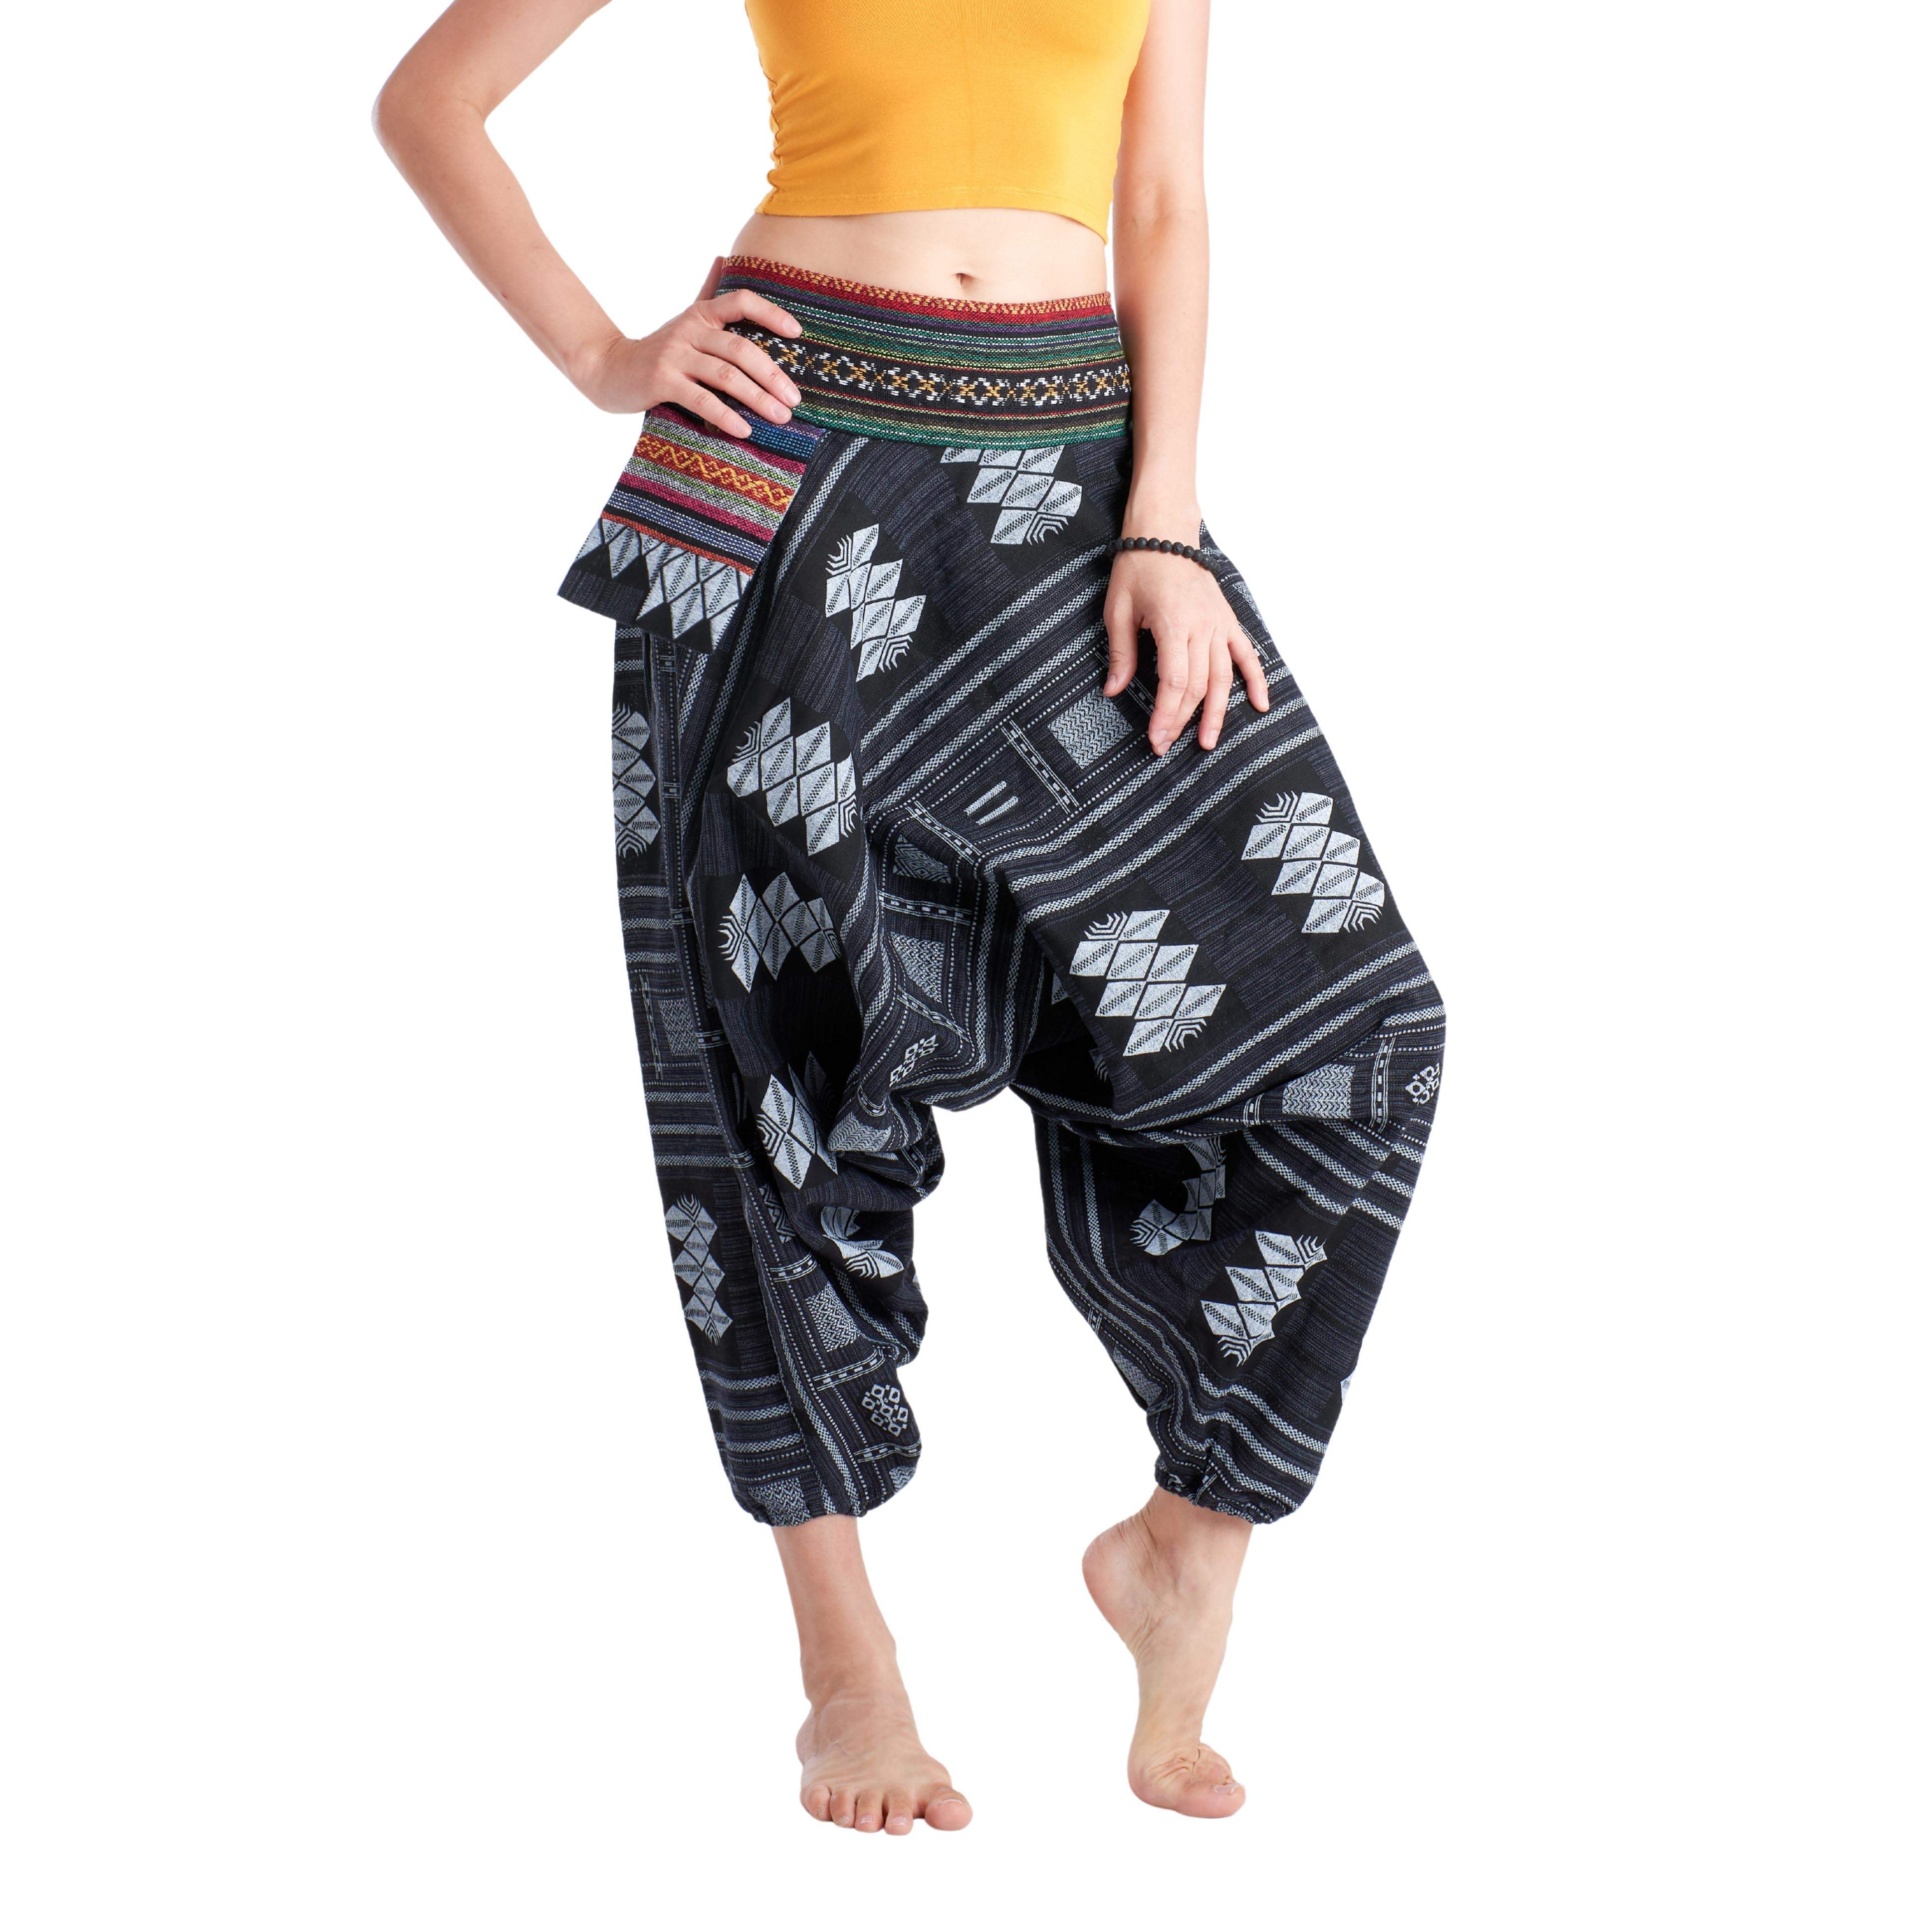 Tribal - Buy Today Elephant Pants Jewelry And Bohemian Clothes Handmade In Thailand Help To Save The Elephants FairTrade And Vegan